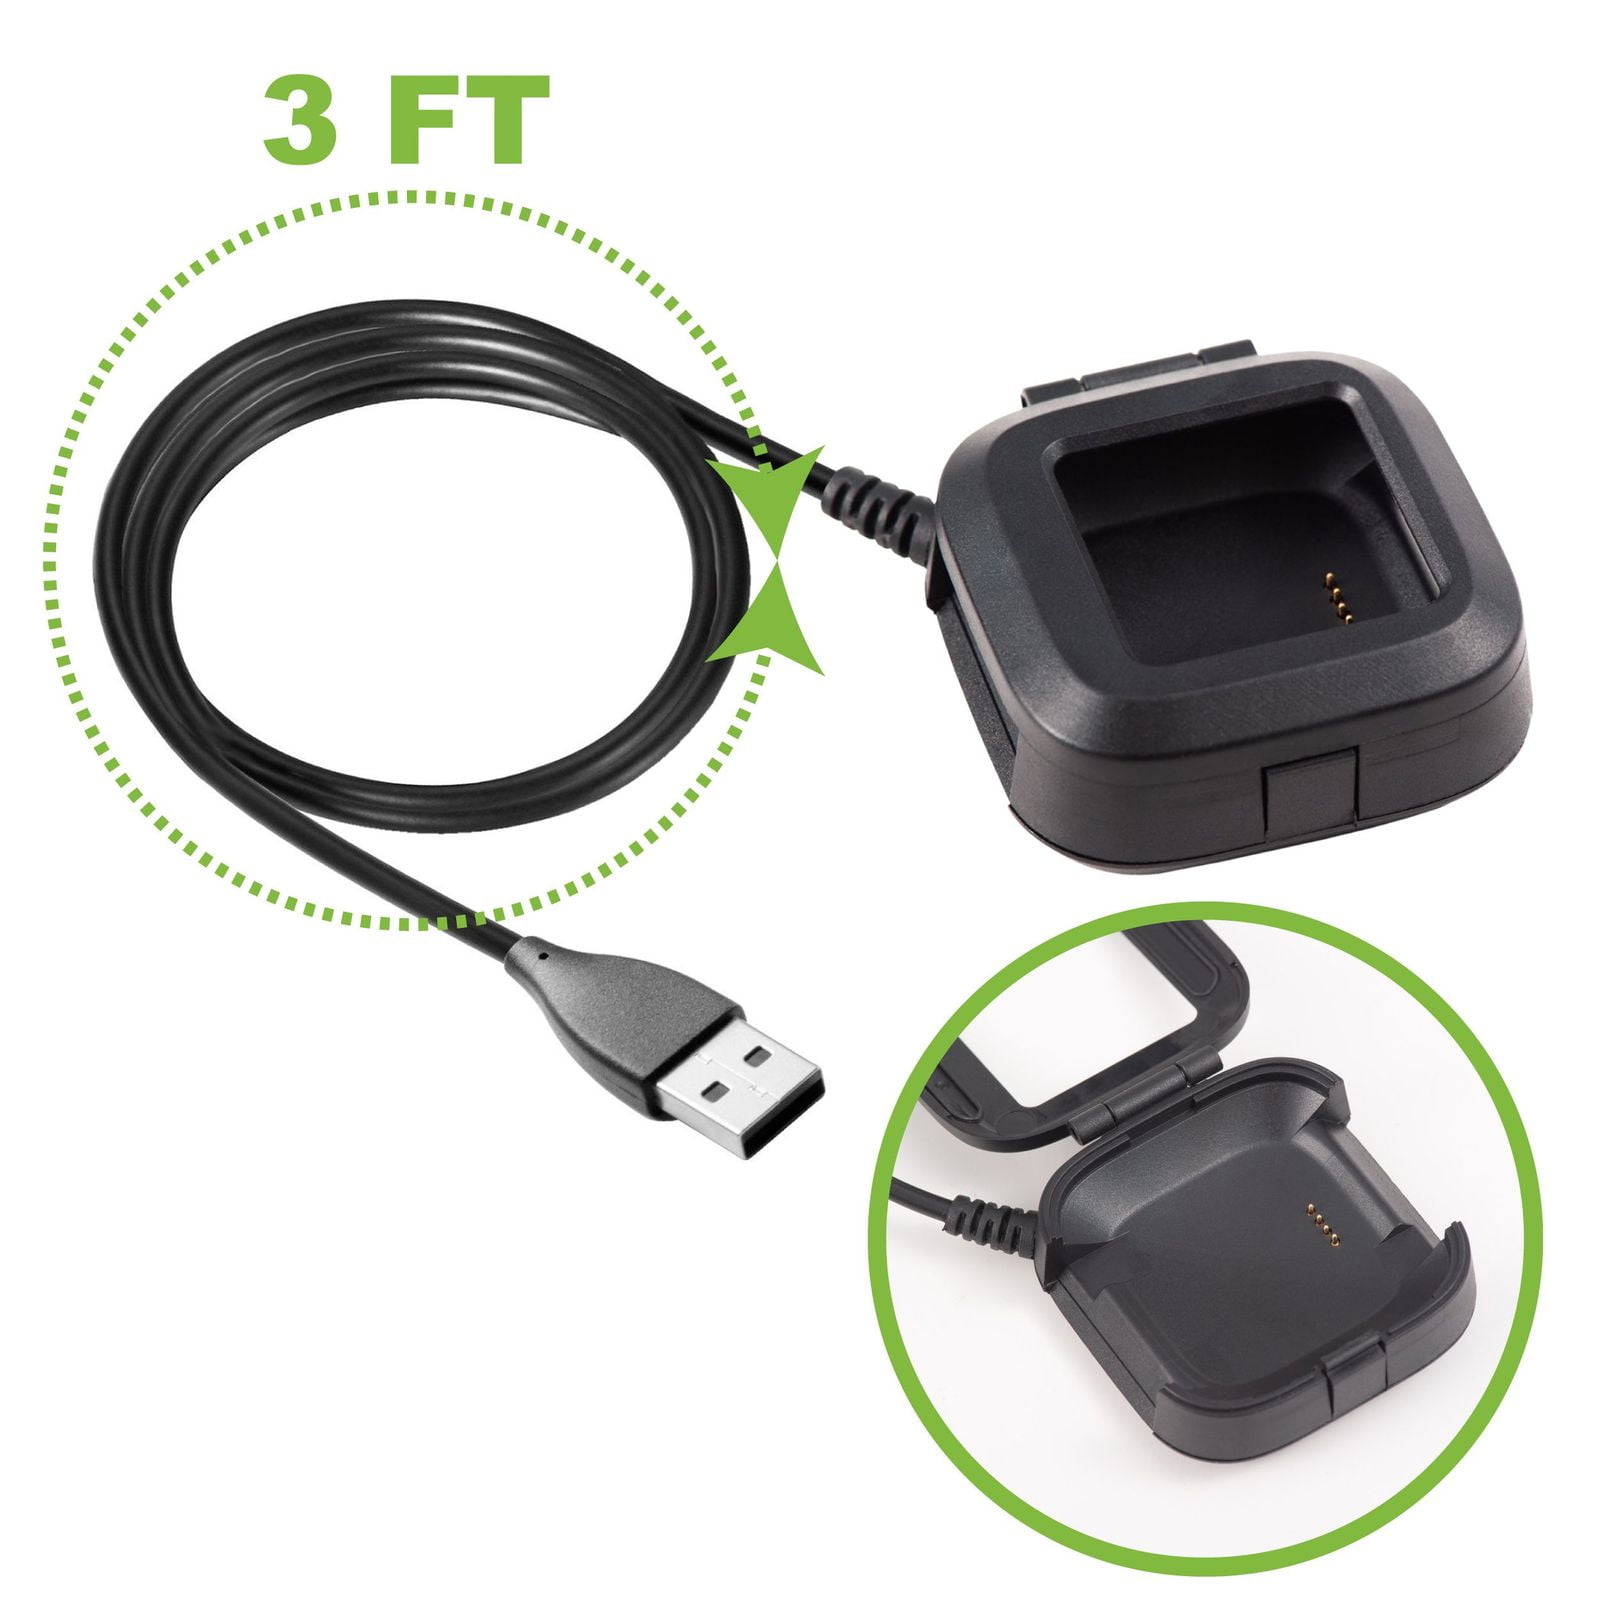 Versa Lite For Fitbit Versa Versa 2 USB Charging Cable Charger Dock Cradles 